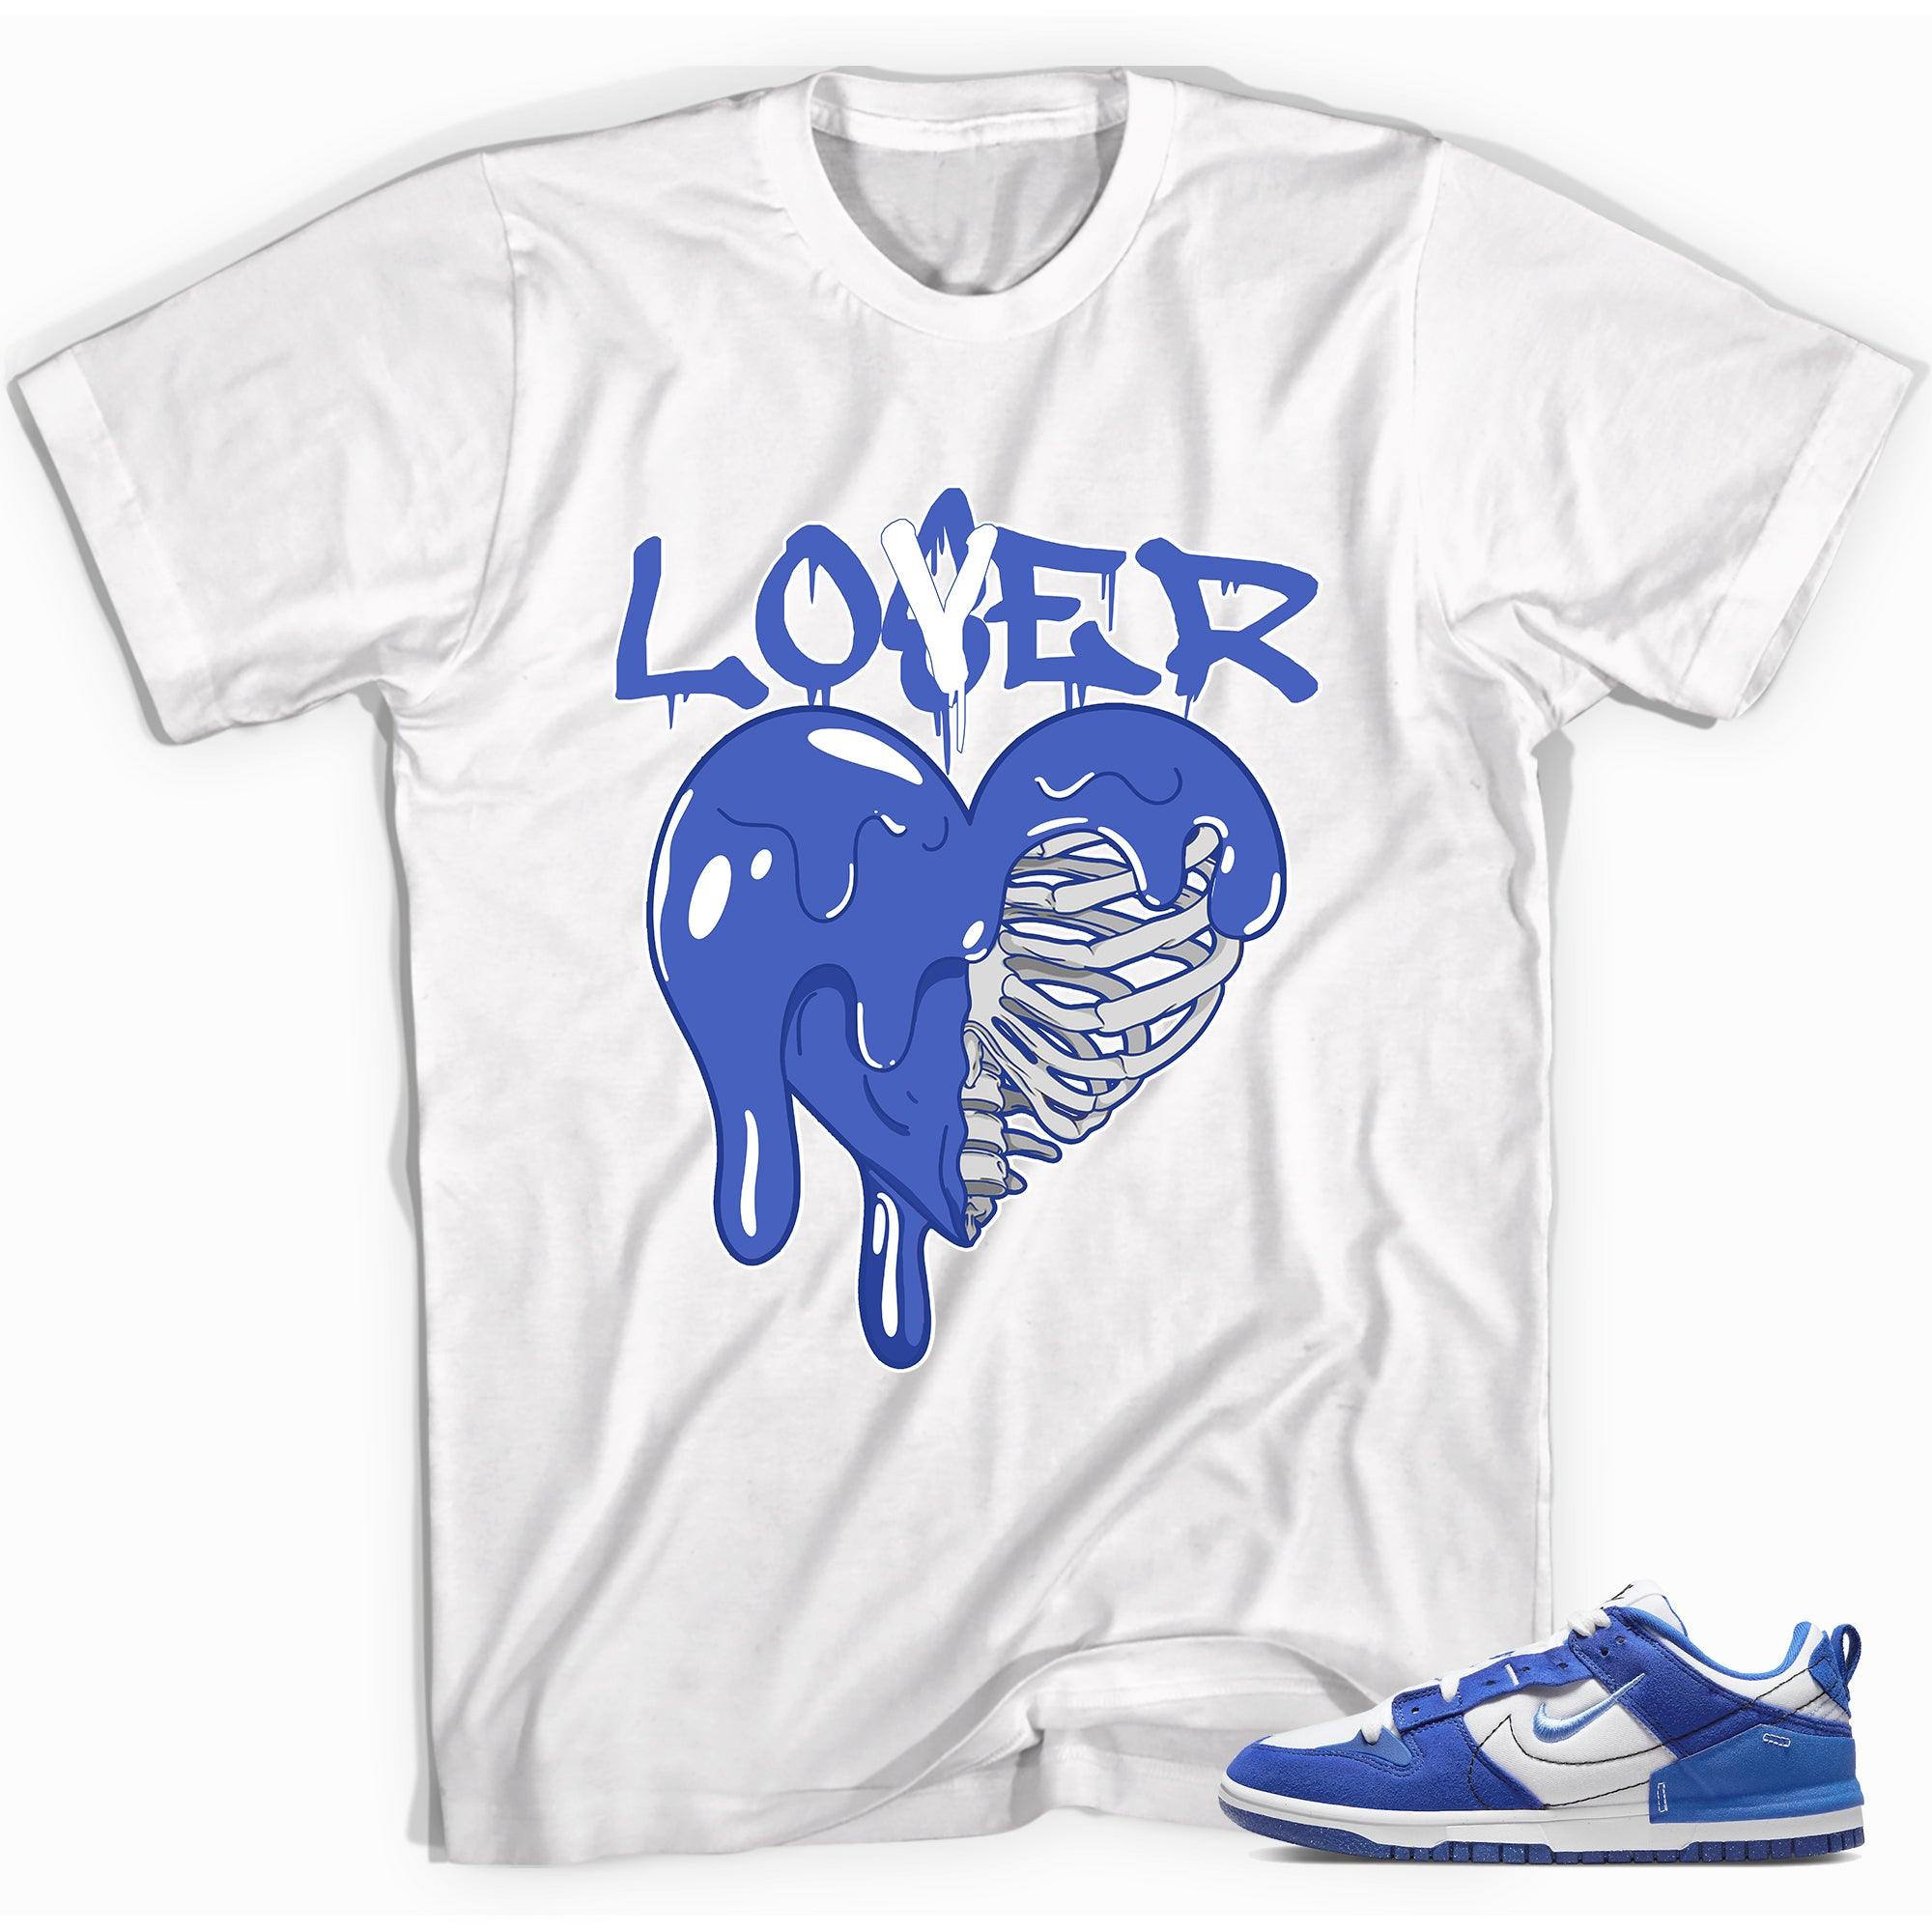 Cool White graphic tee with “ Lover Loser ” print, that perfectly matches Nike Dunk Disrupt 2 Hyper Royal sneakers 